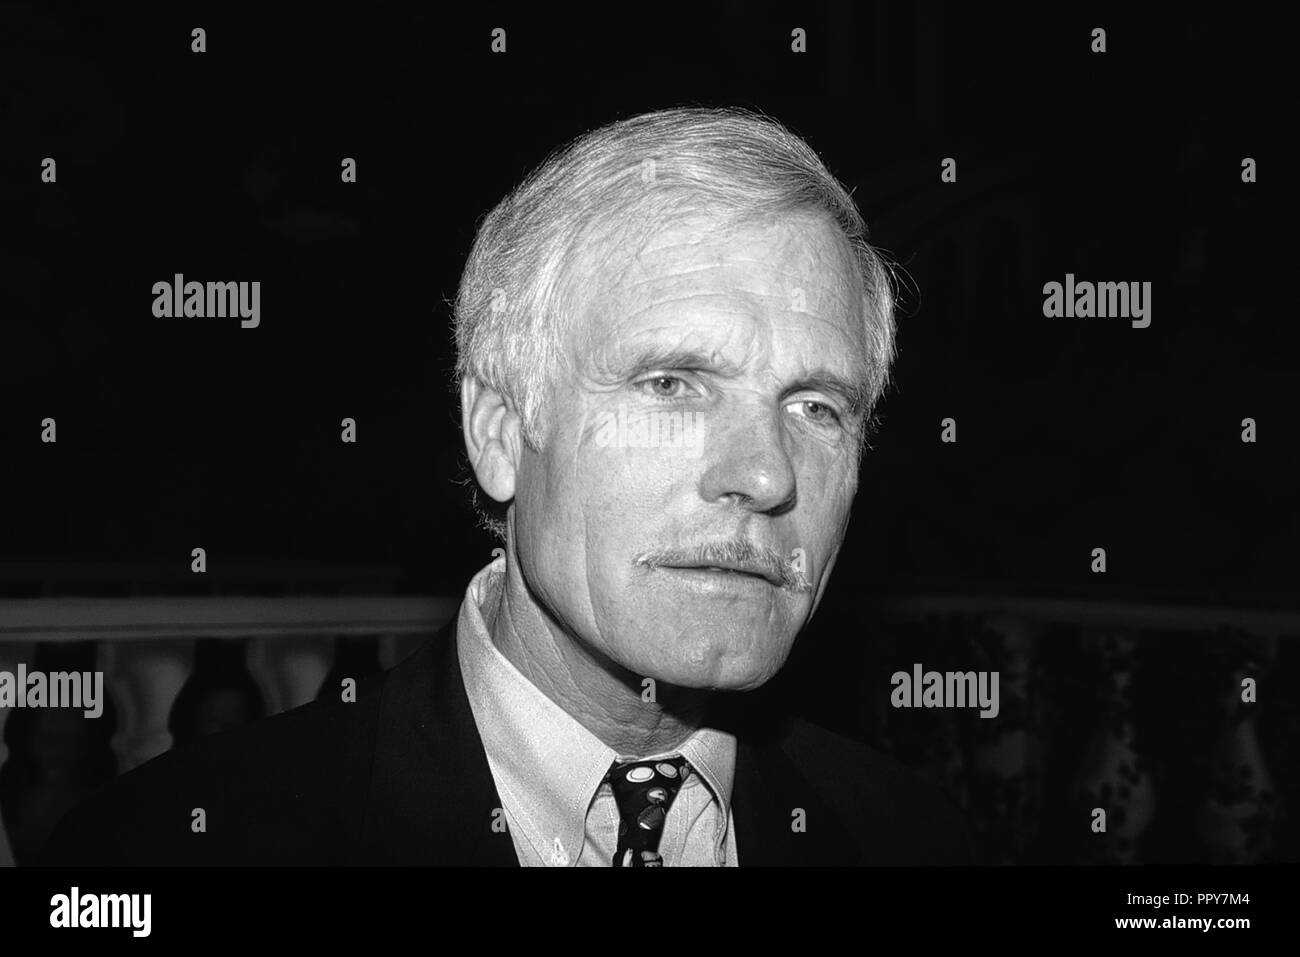 Ted turner Black and White Stock Photos & Images - Alamy